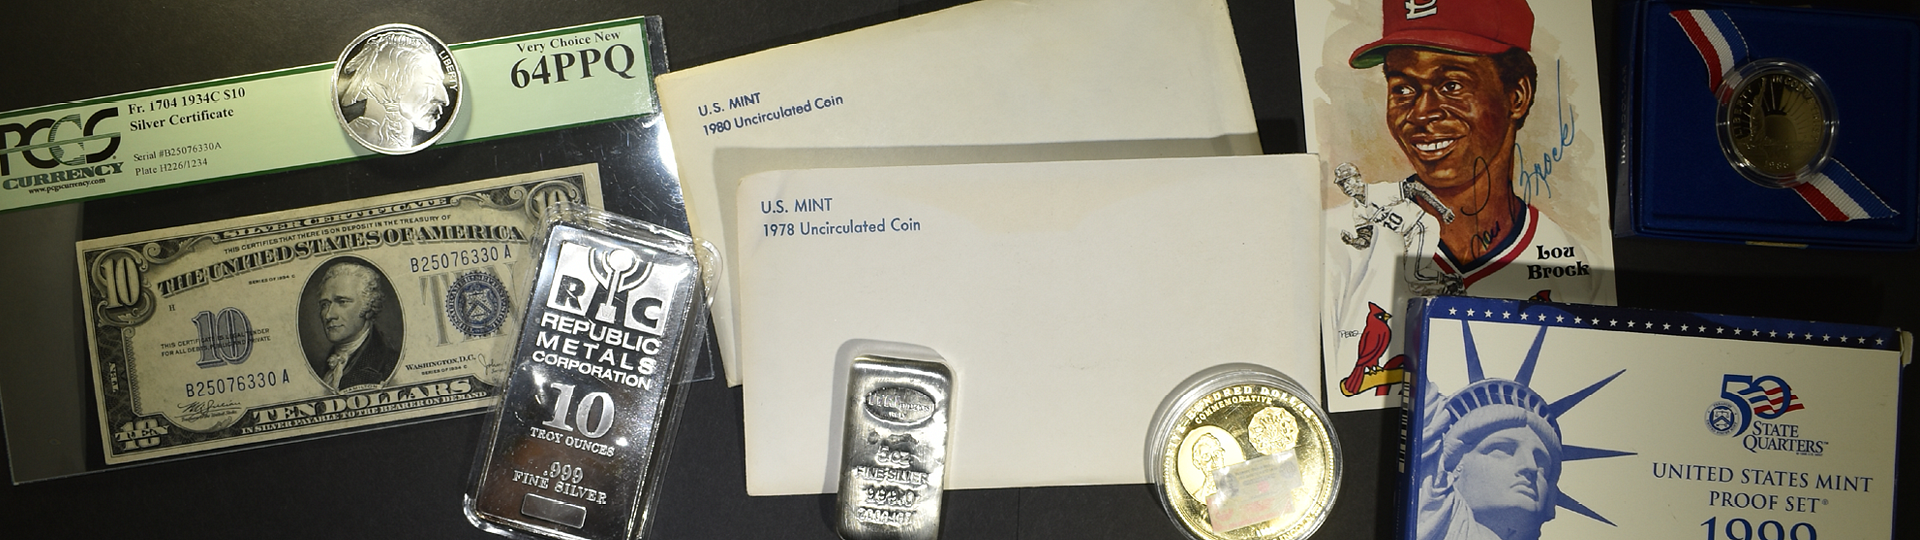 February 8th Silver City Rare Coins & Sports  by Silver City Auctions